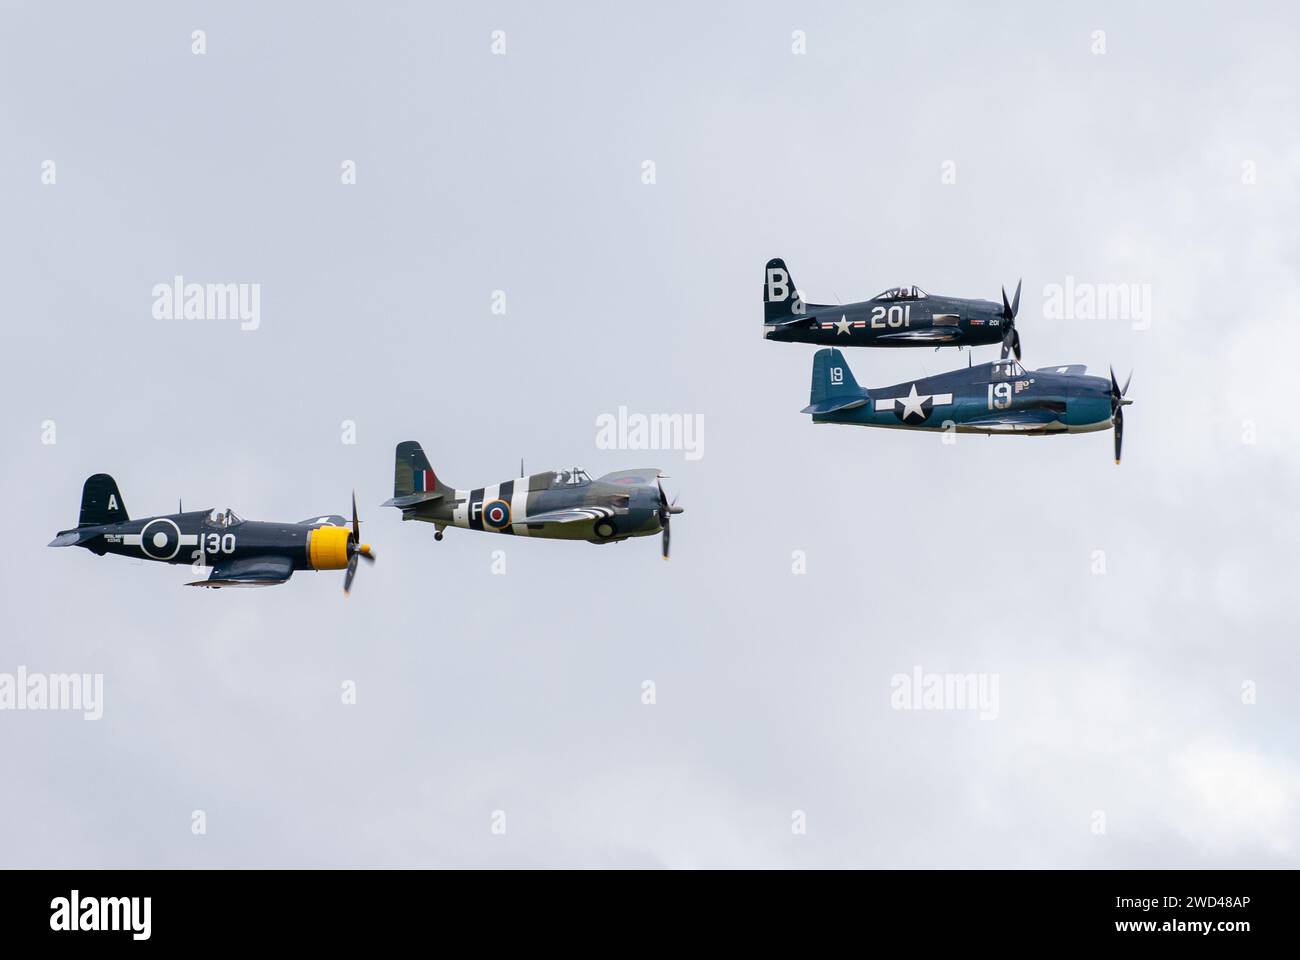 American WW2 fighter planes fly in close formation in the sky. F4U corsair, F8F Wildcat, F4F among others. Stock Photo